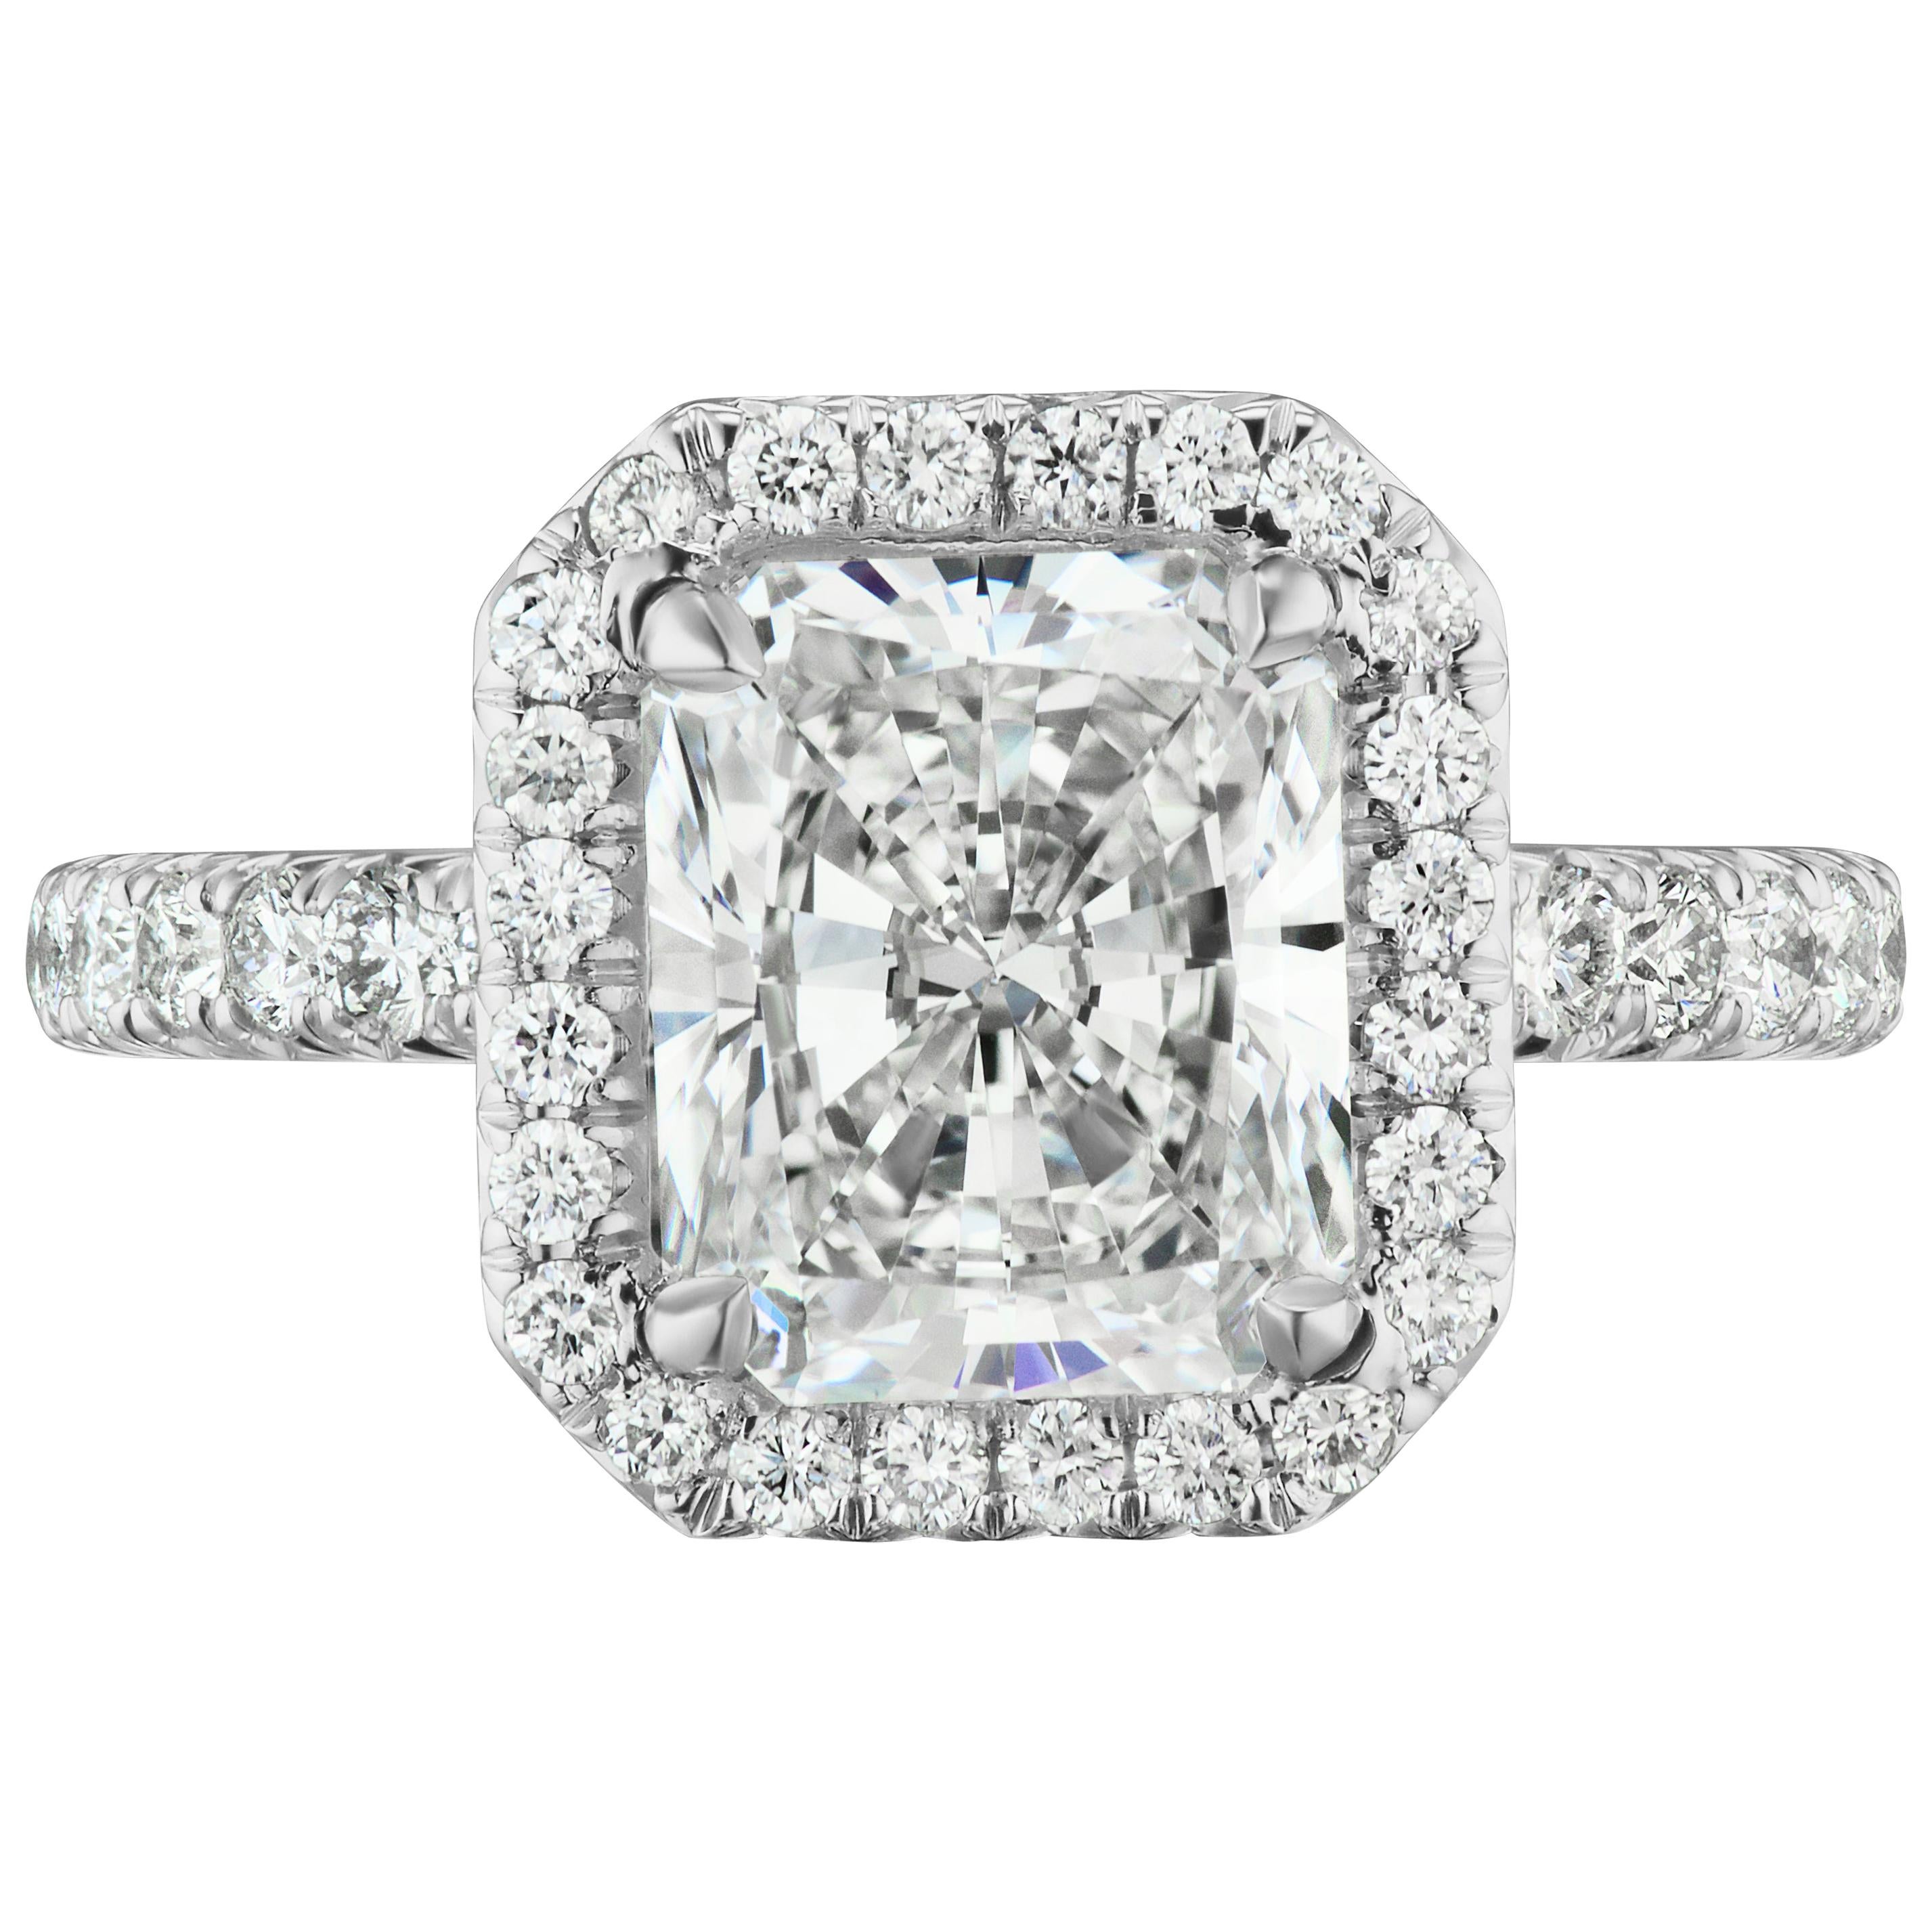 2.21 Carat Conflict Free GIA Certified GVS2 Radiant Cut Diamond Halo Ring For Sale